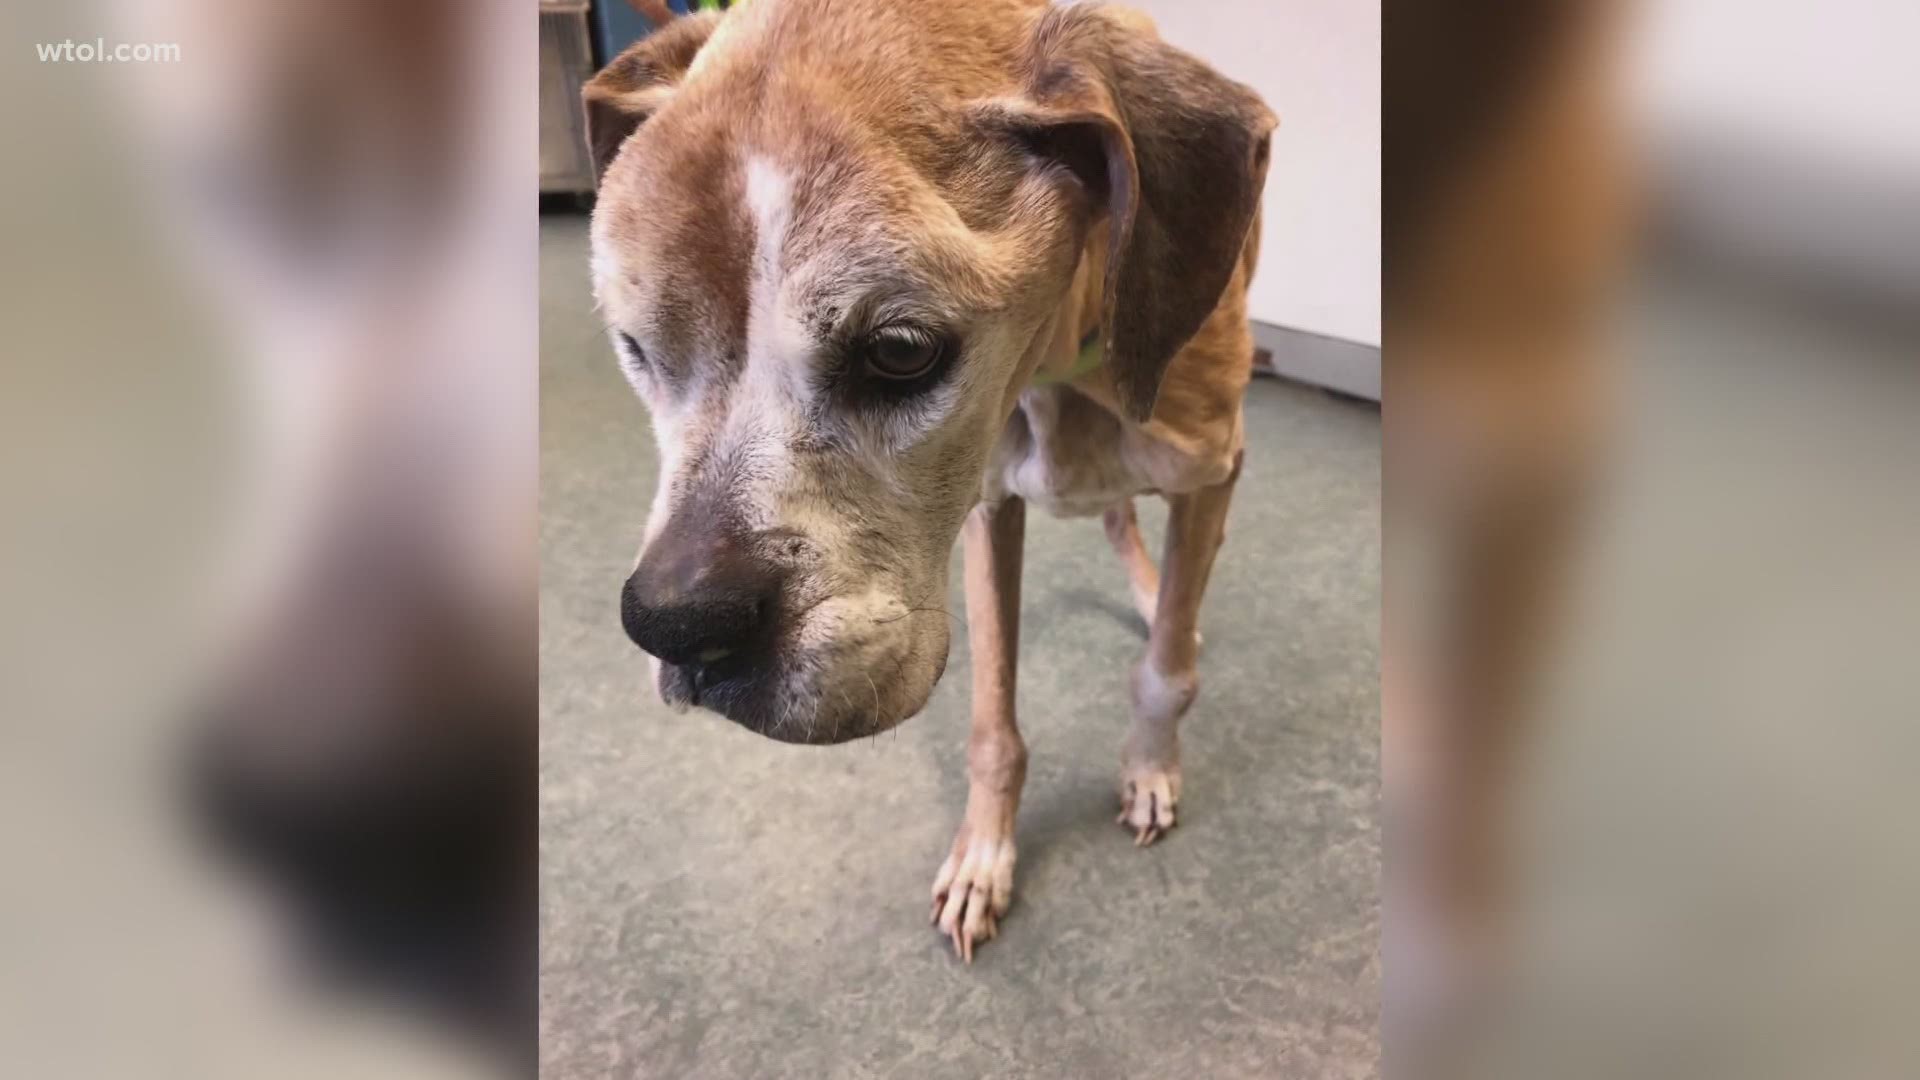 Female boxer was 20-30 pounds underweight and had to be euthanized.